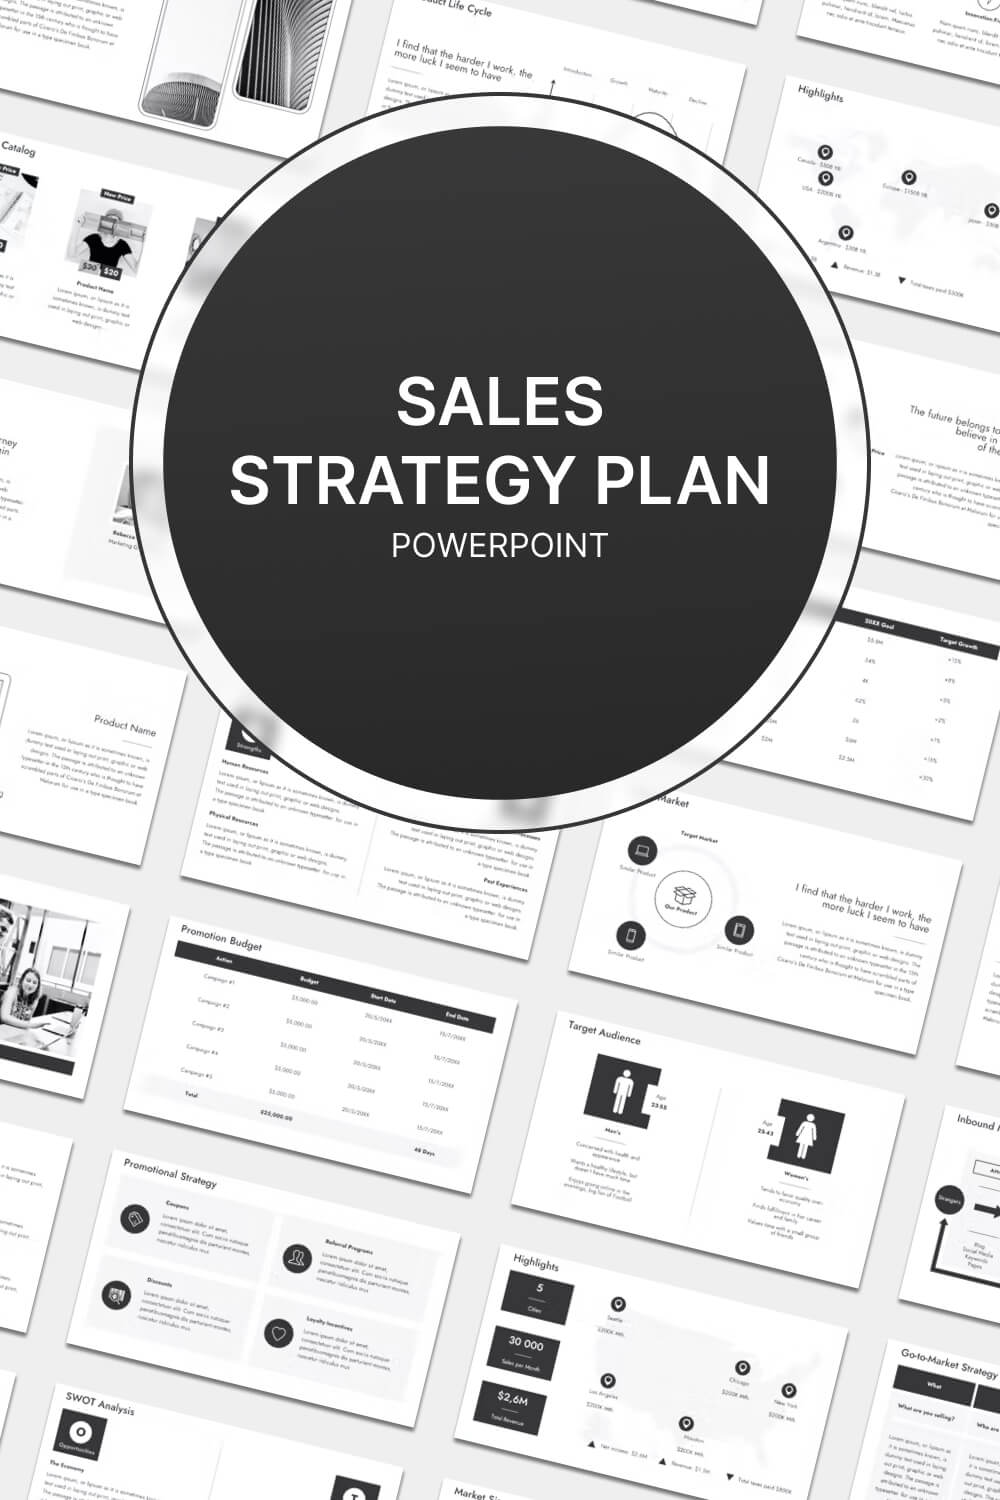 SWOT Analysis of Sales Strategy Plan PowerPoint.